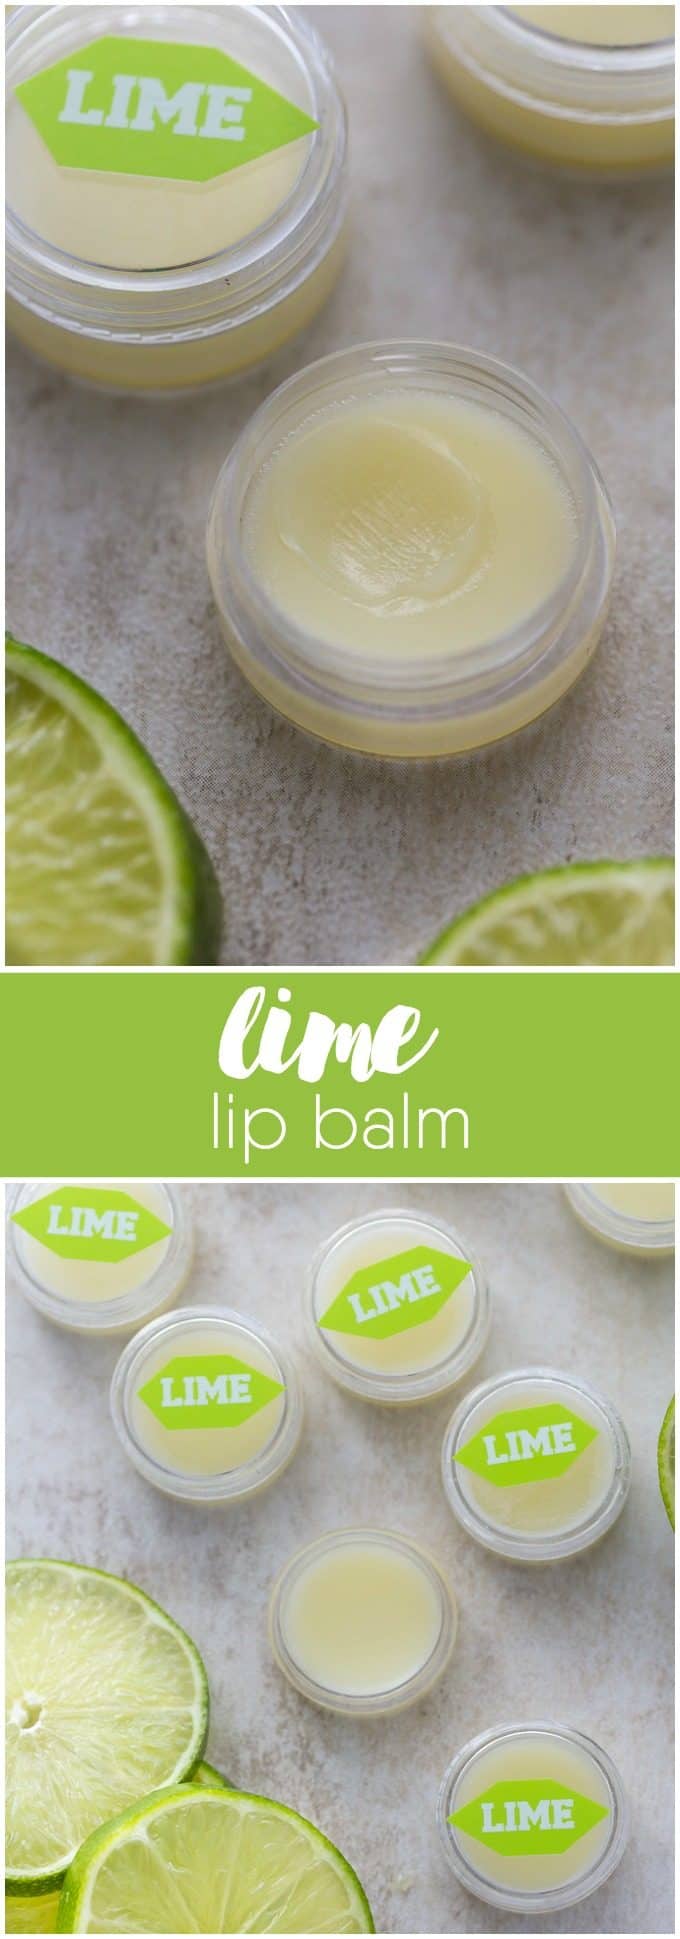 Lime Lip Balm - Making your own lip balm isn't hard to do! This one smells fresh and tangy and feels wonderful on dry lips.